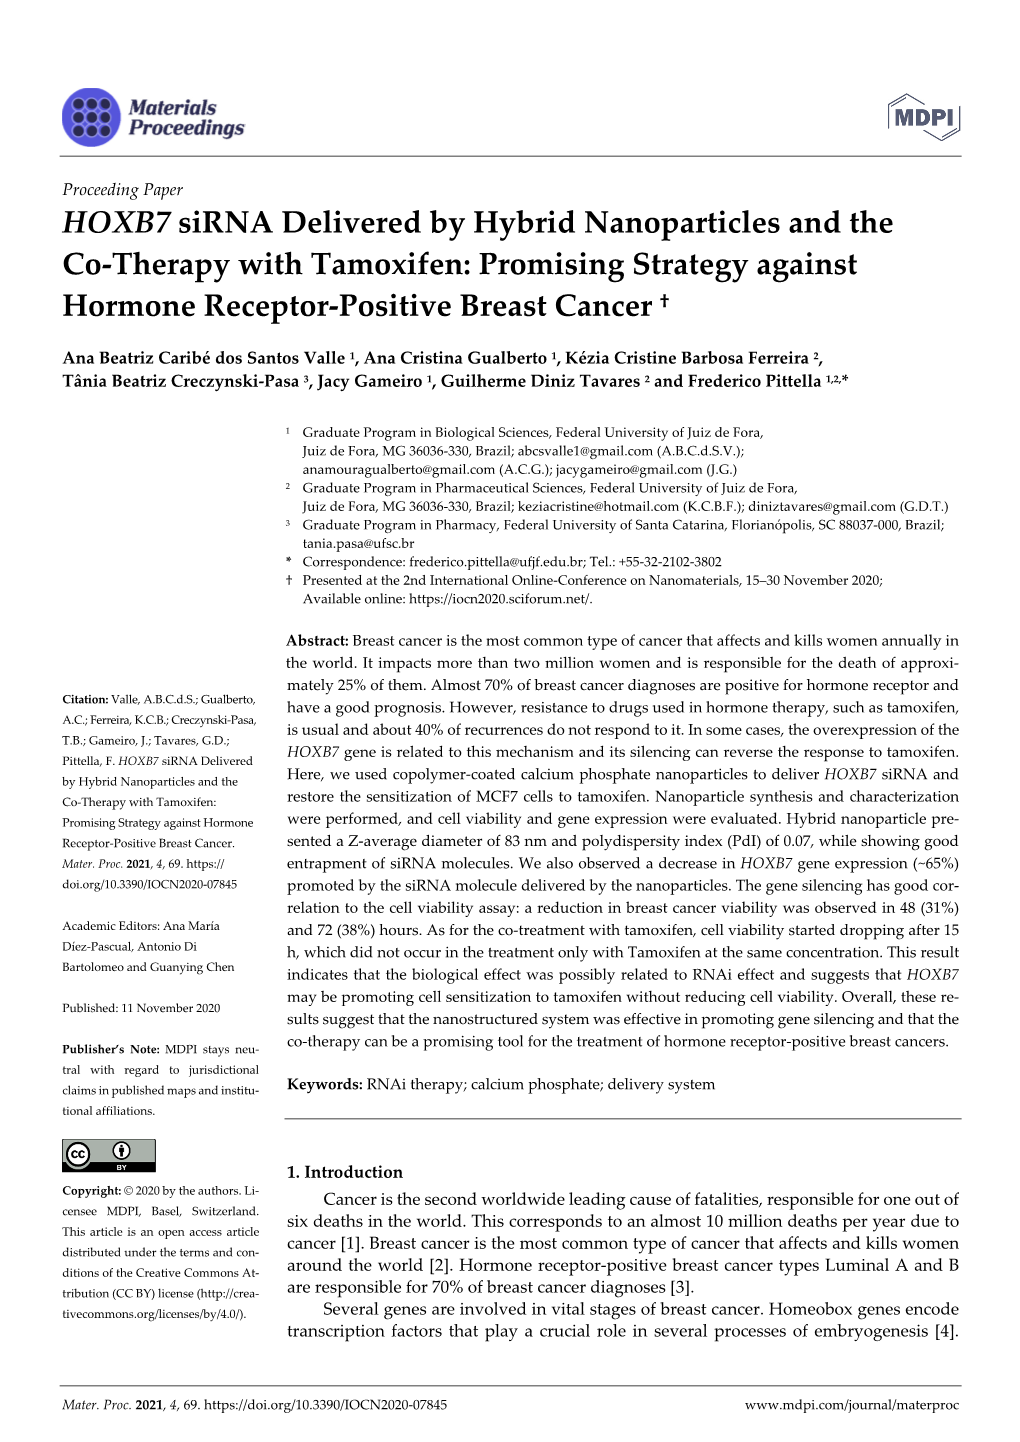 HOXB7 Sirna Delivered by Hybrid Nanoparticles and the Co-Therapy with Tamoxifen: Promising Strategy Against Hormone Receptor-Positive Breast Cancer †